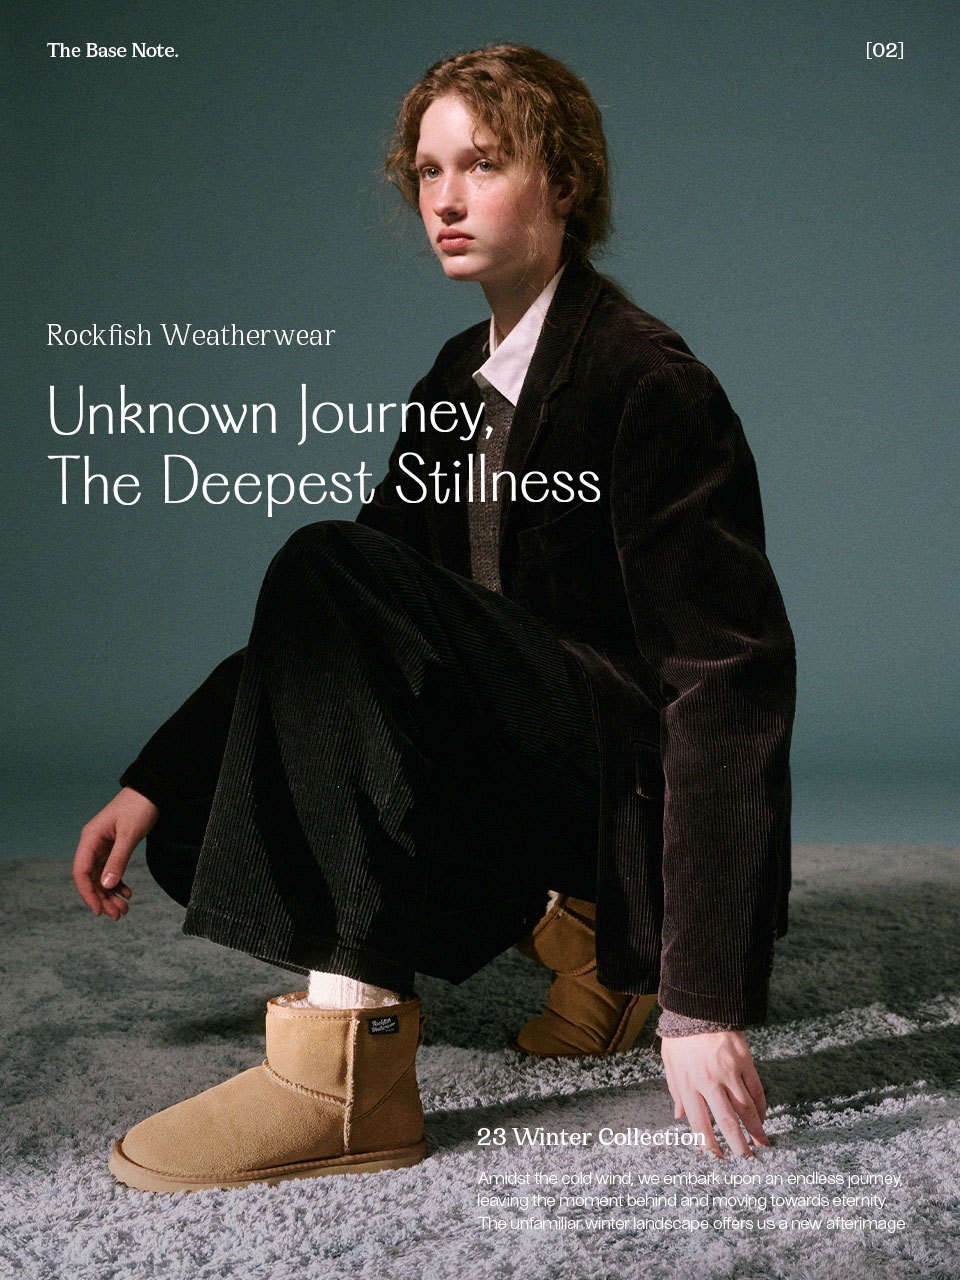 23 Winter Collection - Unknown Journey, The Deepest Stillness